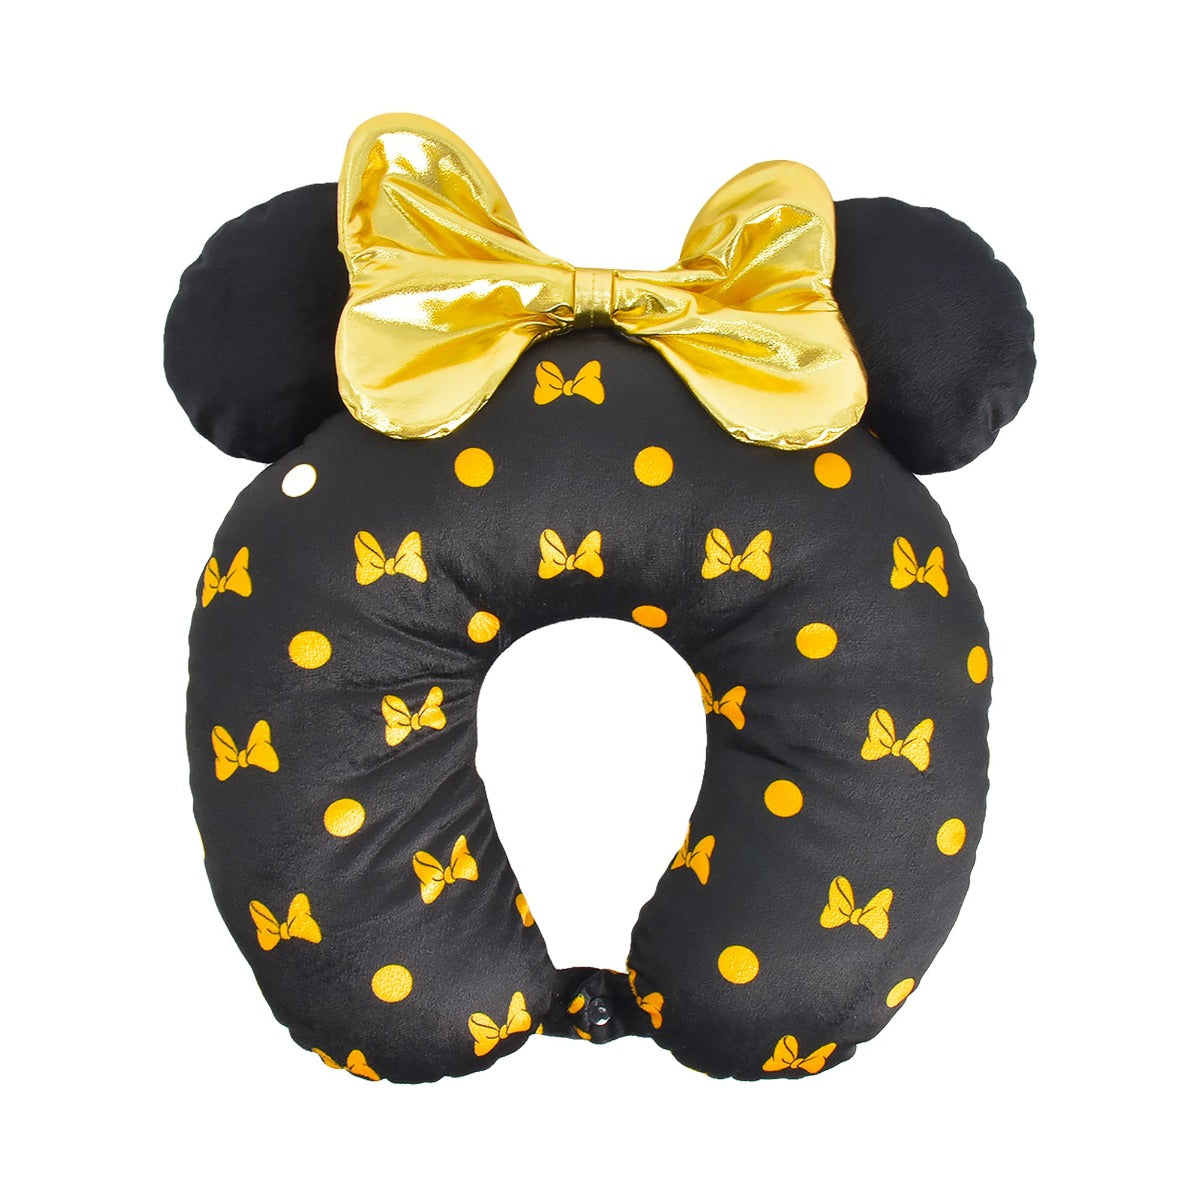 Disney Minnie Mouse black and gold travel neck pillow with 3d ears and bow